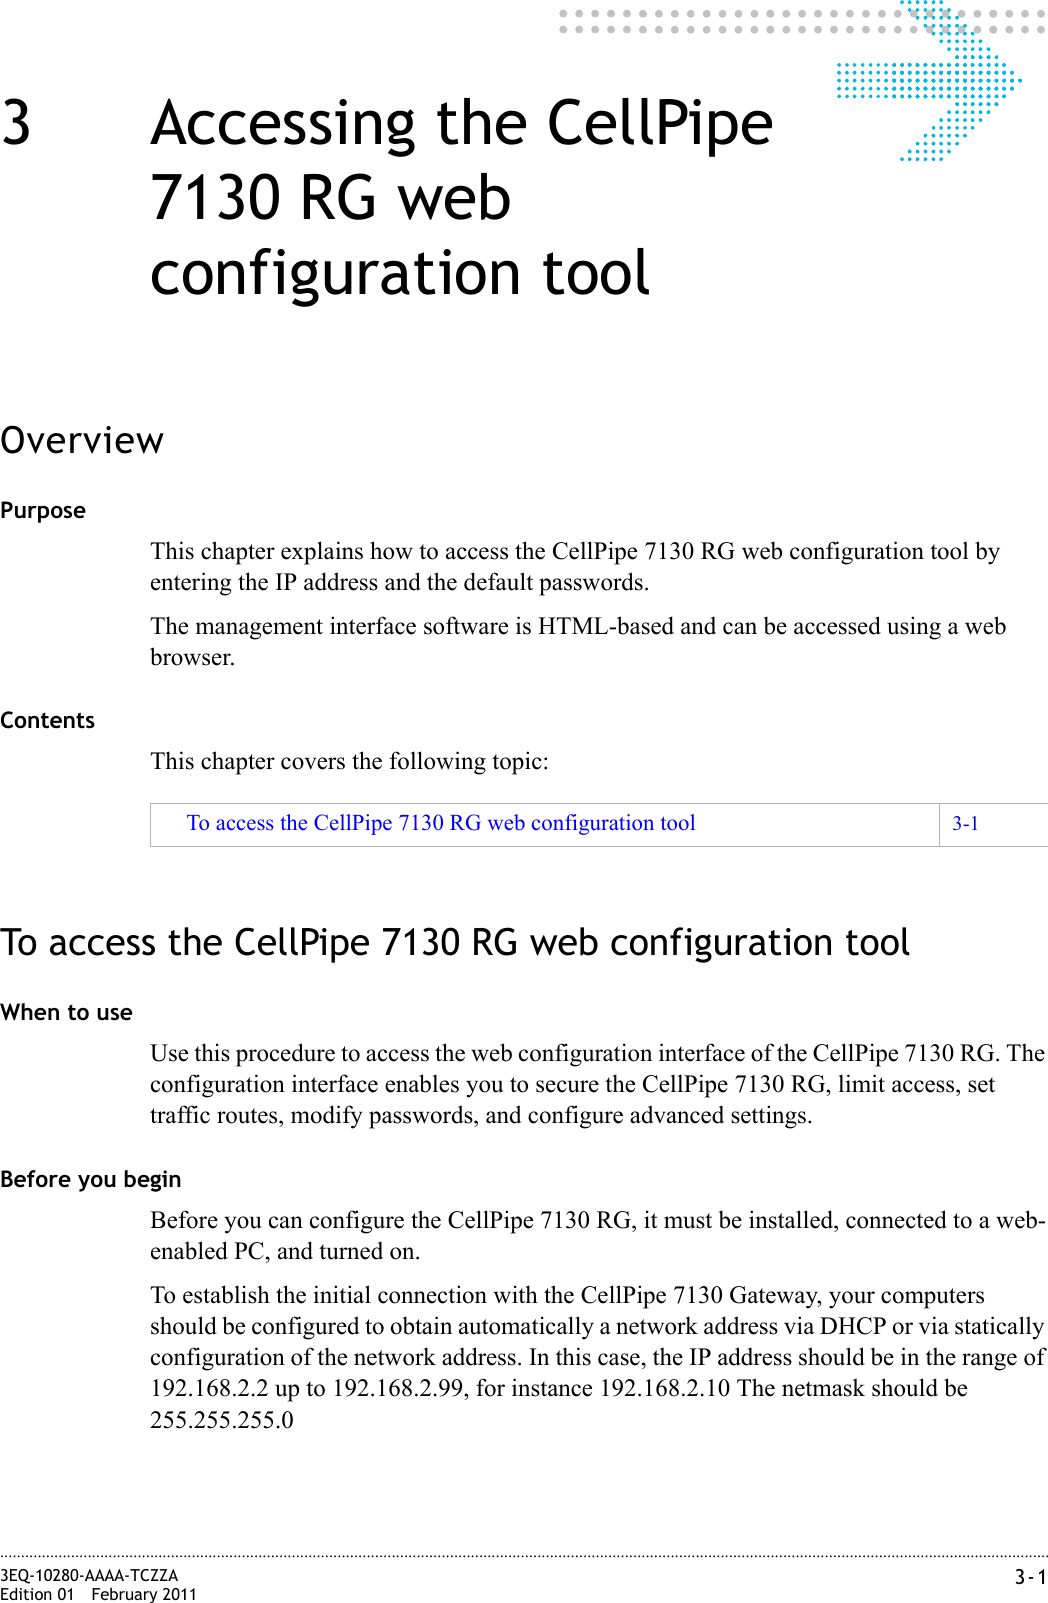 3-13EQ-10280-AAAA-TCZZAEdition 01 February 2011............................................................................................................................................................................................................................................................3 Accessing the CellPipe 7130 RG web configuration toolOverviewPurposeThis chapter explains how to access the CellPipe 7130 RG web configuration tool by entering the IP address and the default passwords.The management interface software is HTML-based and can be accessed using a web browser.ContentsThis chapter covers the following topic:To access the CellPipe 7130 RG web configuration toolWhen to useUse this procedure to access the web configuration interface of the CellPipe 7130 RG. The configuration interface enables you to secure the CellPipe 7130 RG, limit access, set traffic routes, modify passwords, and configure advanced settings.Before you beginBefore you can configure the CellPipe 7130 RG, it must be installed, connected to a web-enabled PC, and turned on.To establish the initial connection with the CellPipe 7130 Gateway, your computers should be configured to obtain automatically a network address via DHCP or via statically configuration of the network address. In this case, the IP address should be in the range of 192.168.2.2 up to 192.168.2.99, for instance 192.168.2.10 The netmask should be 255.255.255.0To access the CellPipe 7130 RG web configuration tool 3-1